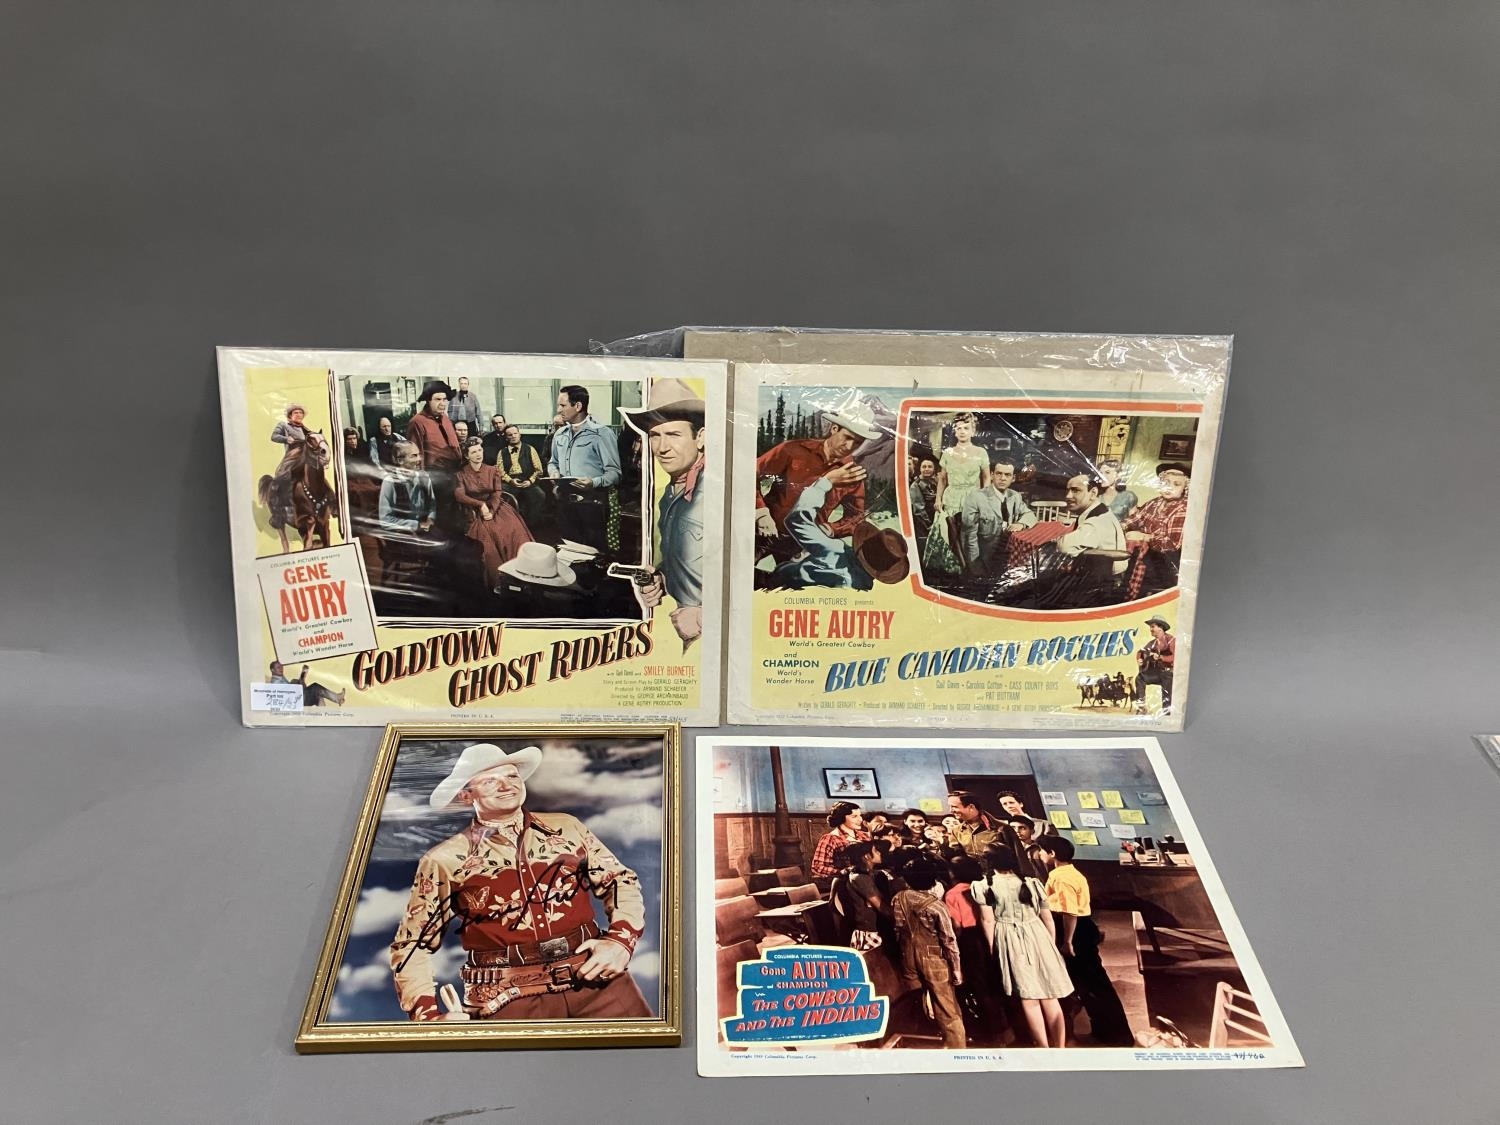 Columbian Pictures Corp film posters, Gene Autry starring in 'Goldtown Ghost Riders' and ' - Image 2 of 19